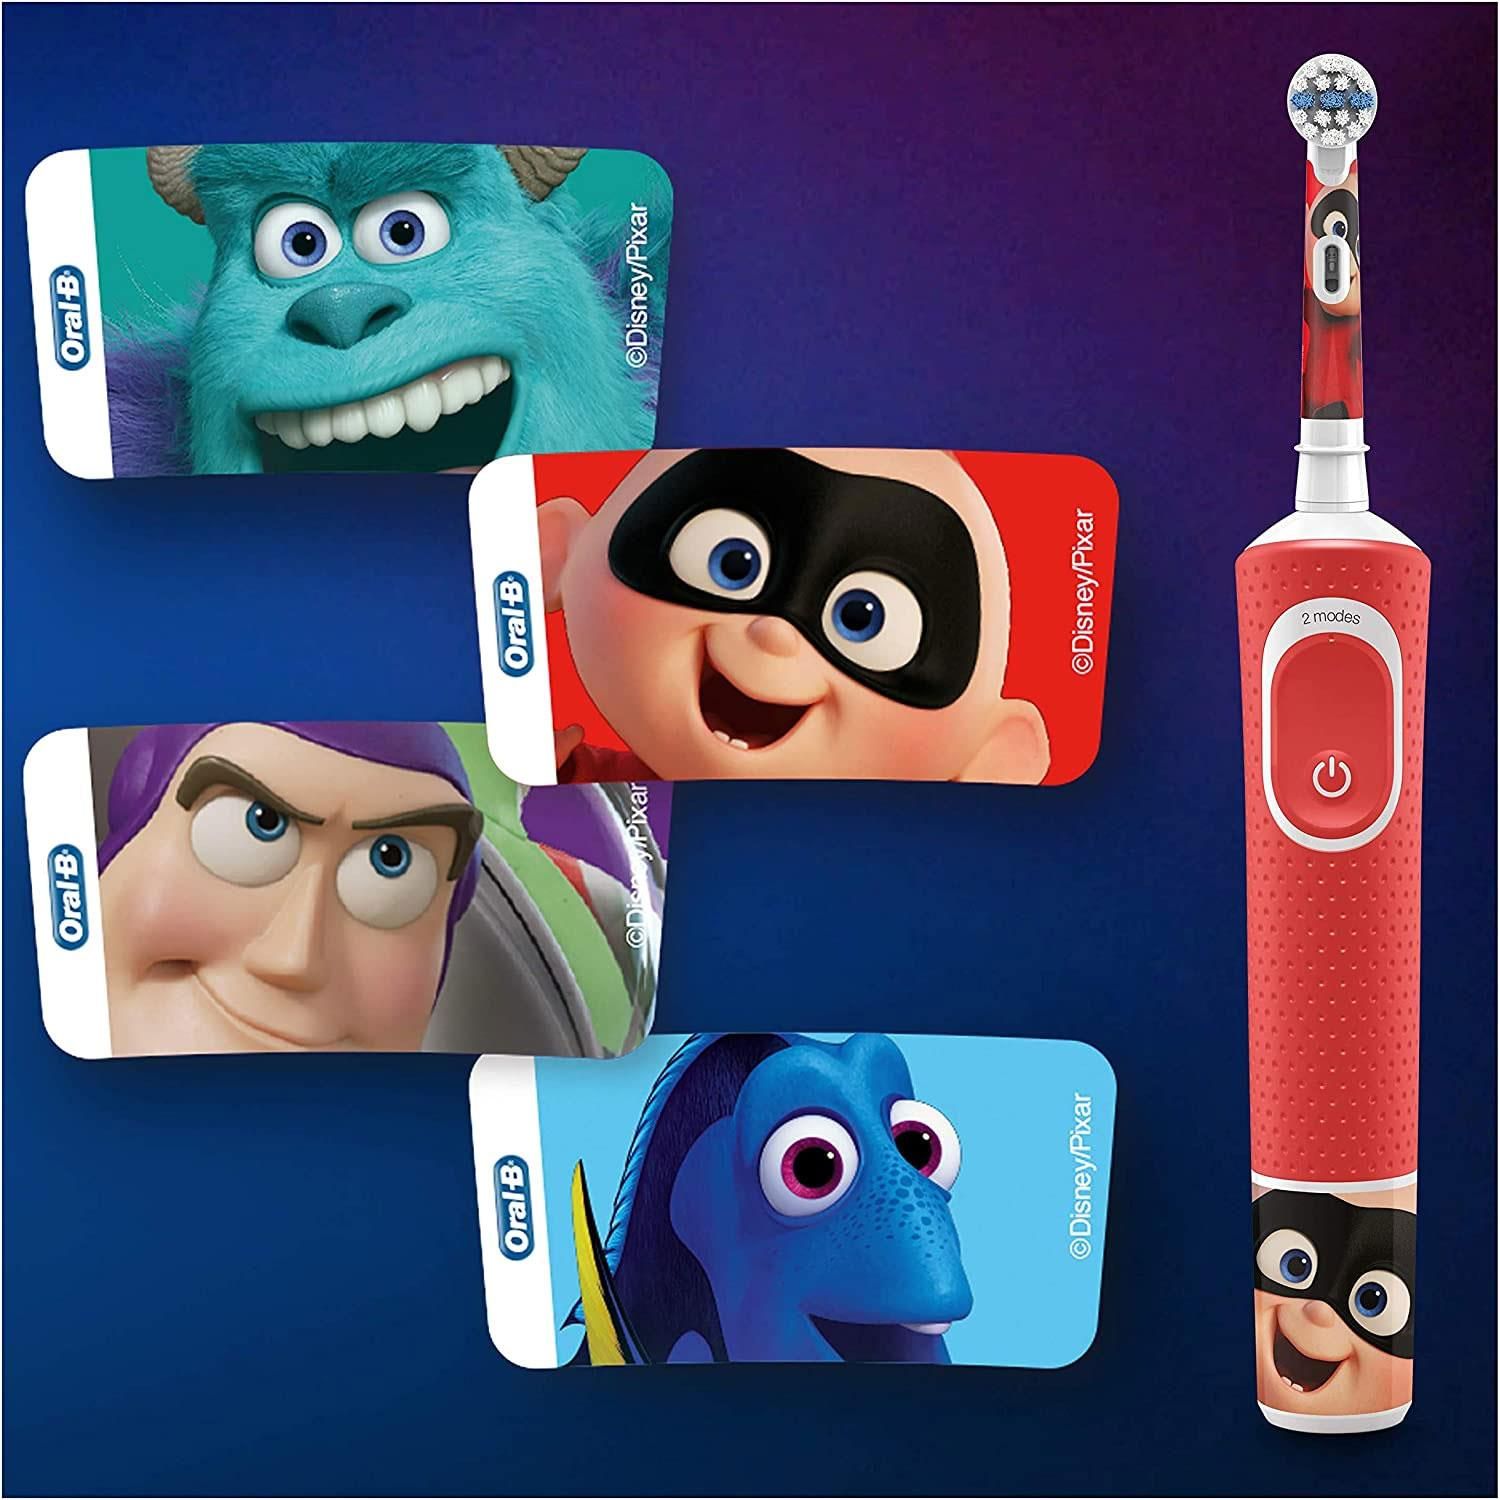 Oral-B Kids 3+ Pixar Electric Toothbrush Giftset with Travel Case.  The Oral-B Kids electric toothbrush for ages 3+ entertains children with Disney Pixar characters stickers while offering gentle and effective cleaning with a toothbrush recommended by Oral-B dentists. With a unique function for brushing sensitive children's teeth, this toothbrush gently cleanses children's teeth. Removes more plaque than a simple manual toothbrush. Includes four stickers from Disney Pixar characters to decorate the handle.

Features: 
 
   Specially designed to be soft with baby teeth
   Round toothbrush head with an ideal size for small mouths Extremely soft fibres that are soft on the gums
   Suitable for ages 3+
   Decorate the brush handle with 4 stickers from Disney Pixar characters
   Works with Oral-B Disney Magic Timer app
   Rechargeable battery for charging that lasts 8 days
   Encourages brushing for 2 minutes with the built-in timer

The Box contains: 1x electric toothbrush, 4x sticker for the body of the brush, 1x replacement stages powerhead, 1x travel case with a motif, 1x charging station